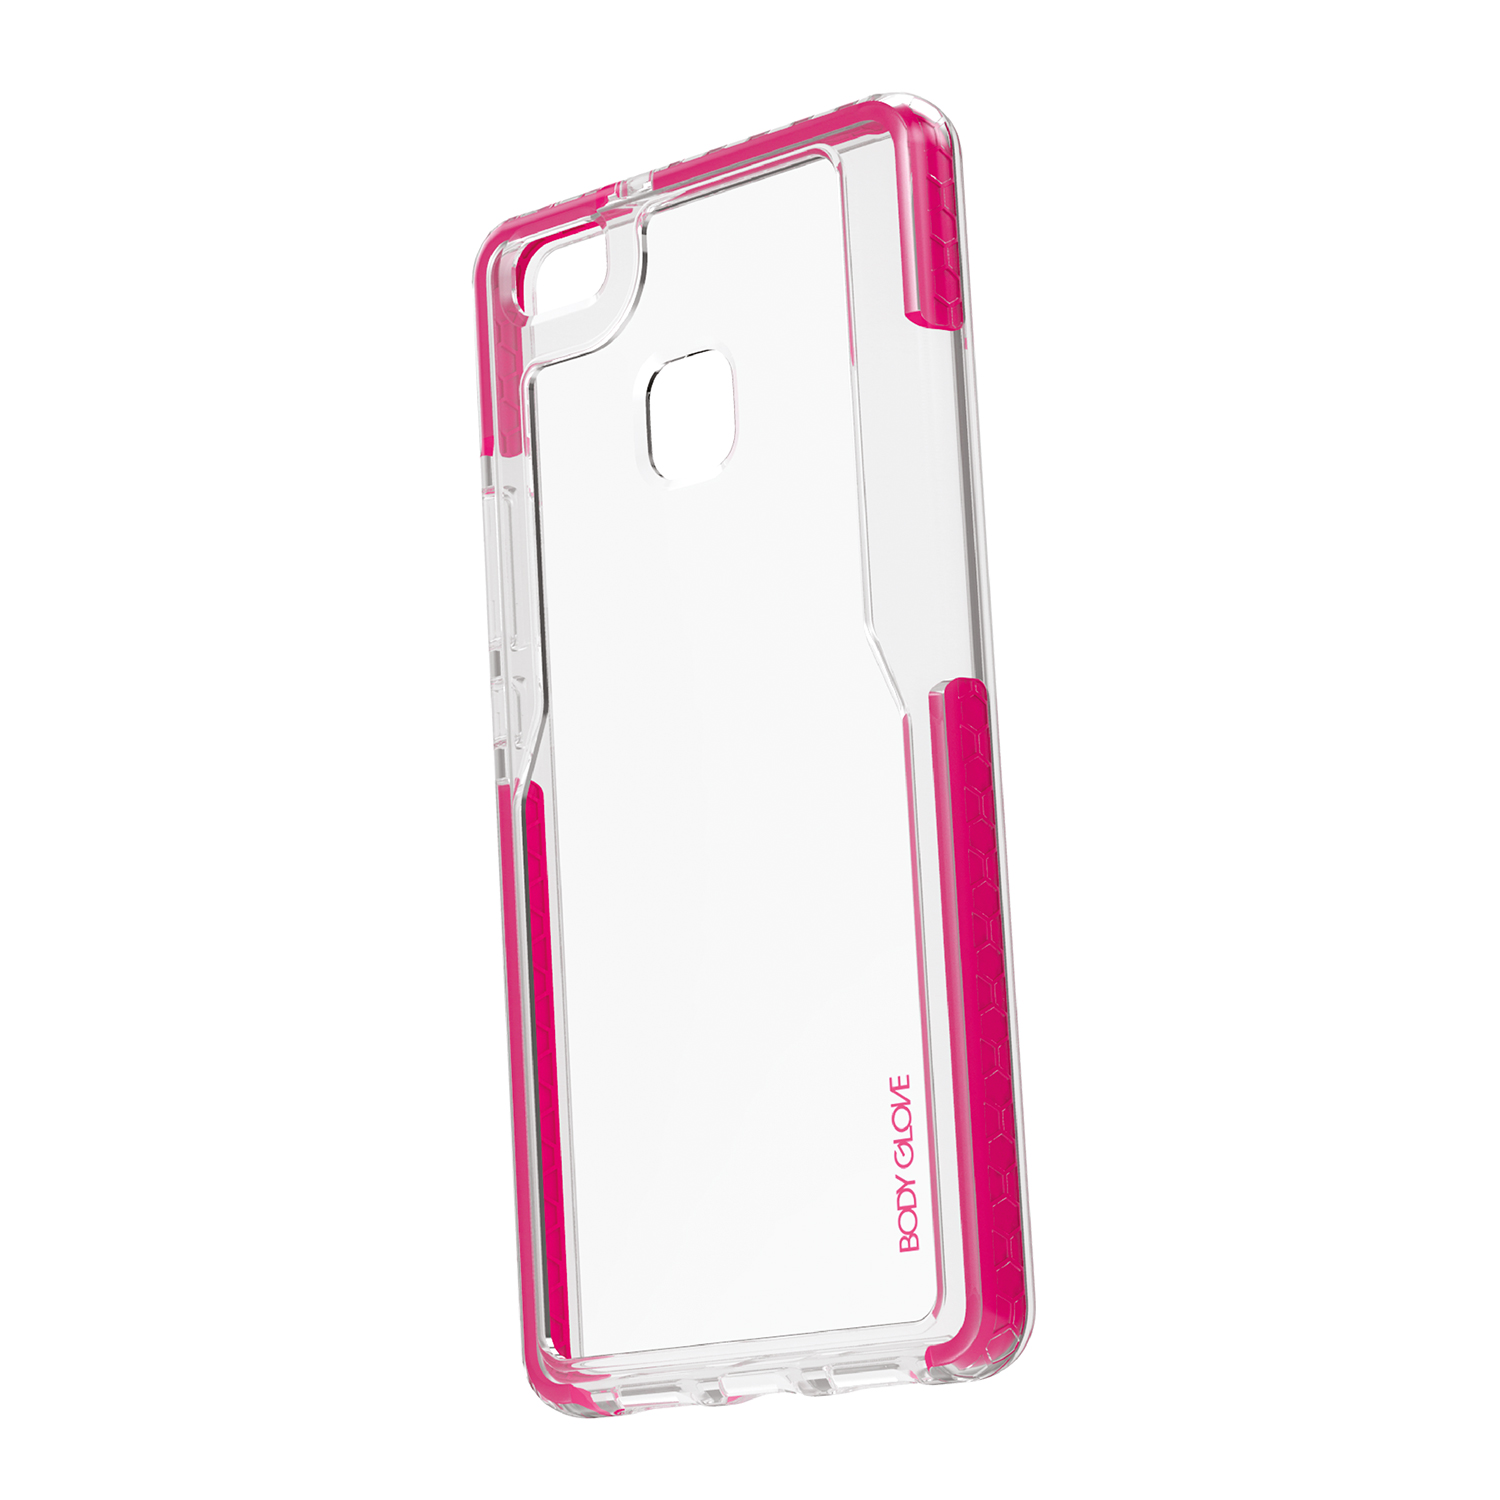 Body Glove Dropsuit Case for Huawei P9 Lite - Pink